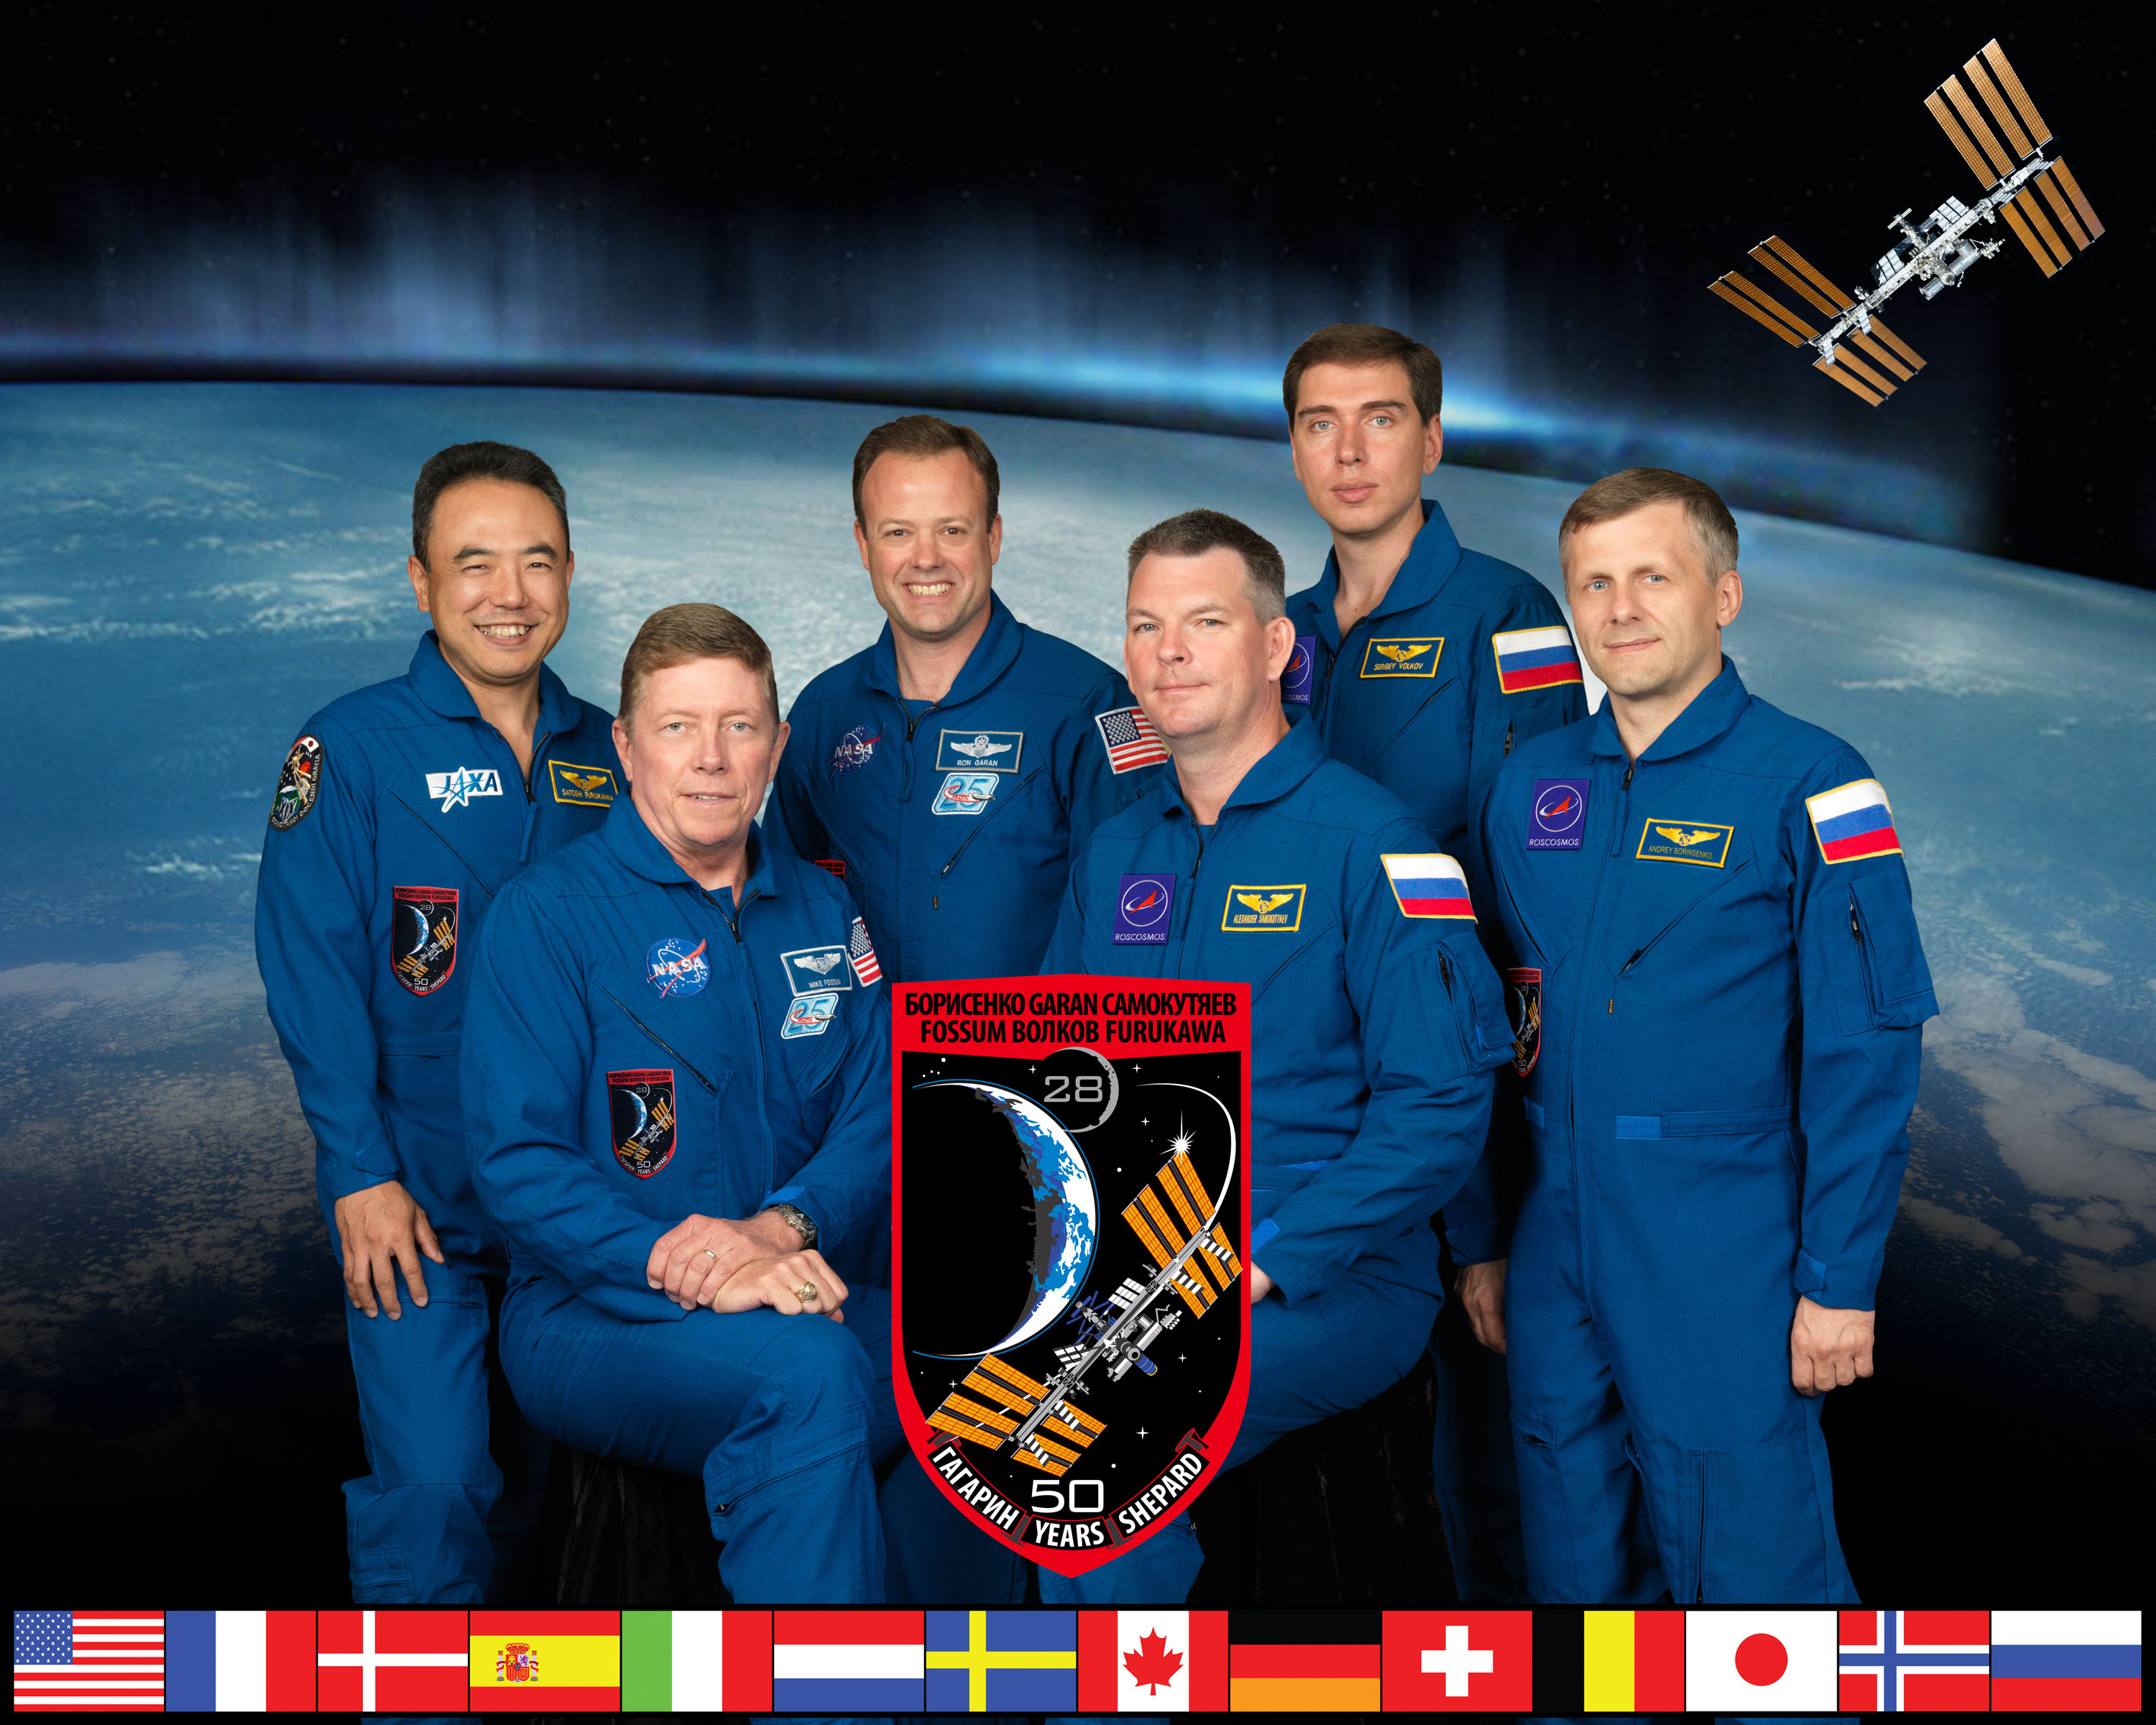 Expedition 28 Official Crew Portrait